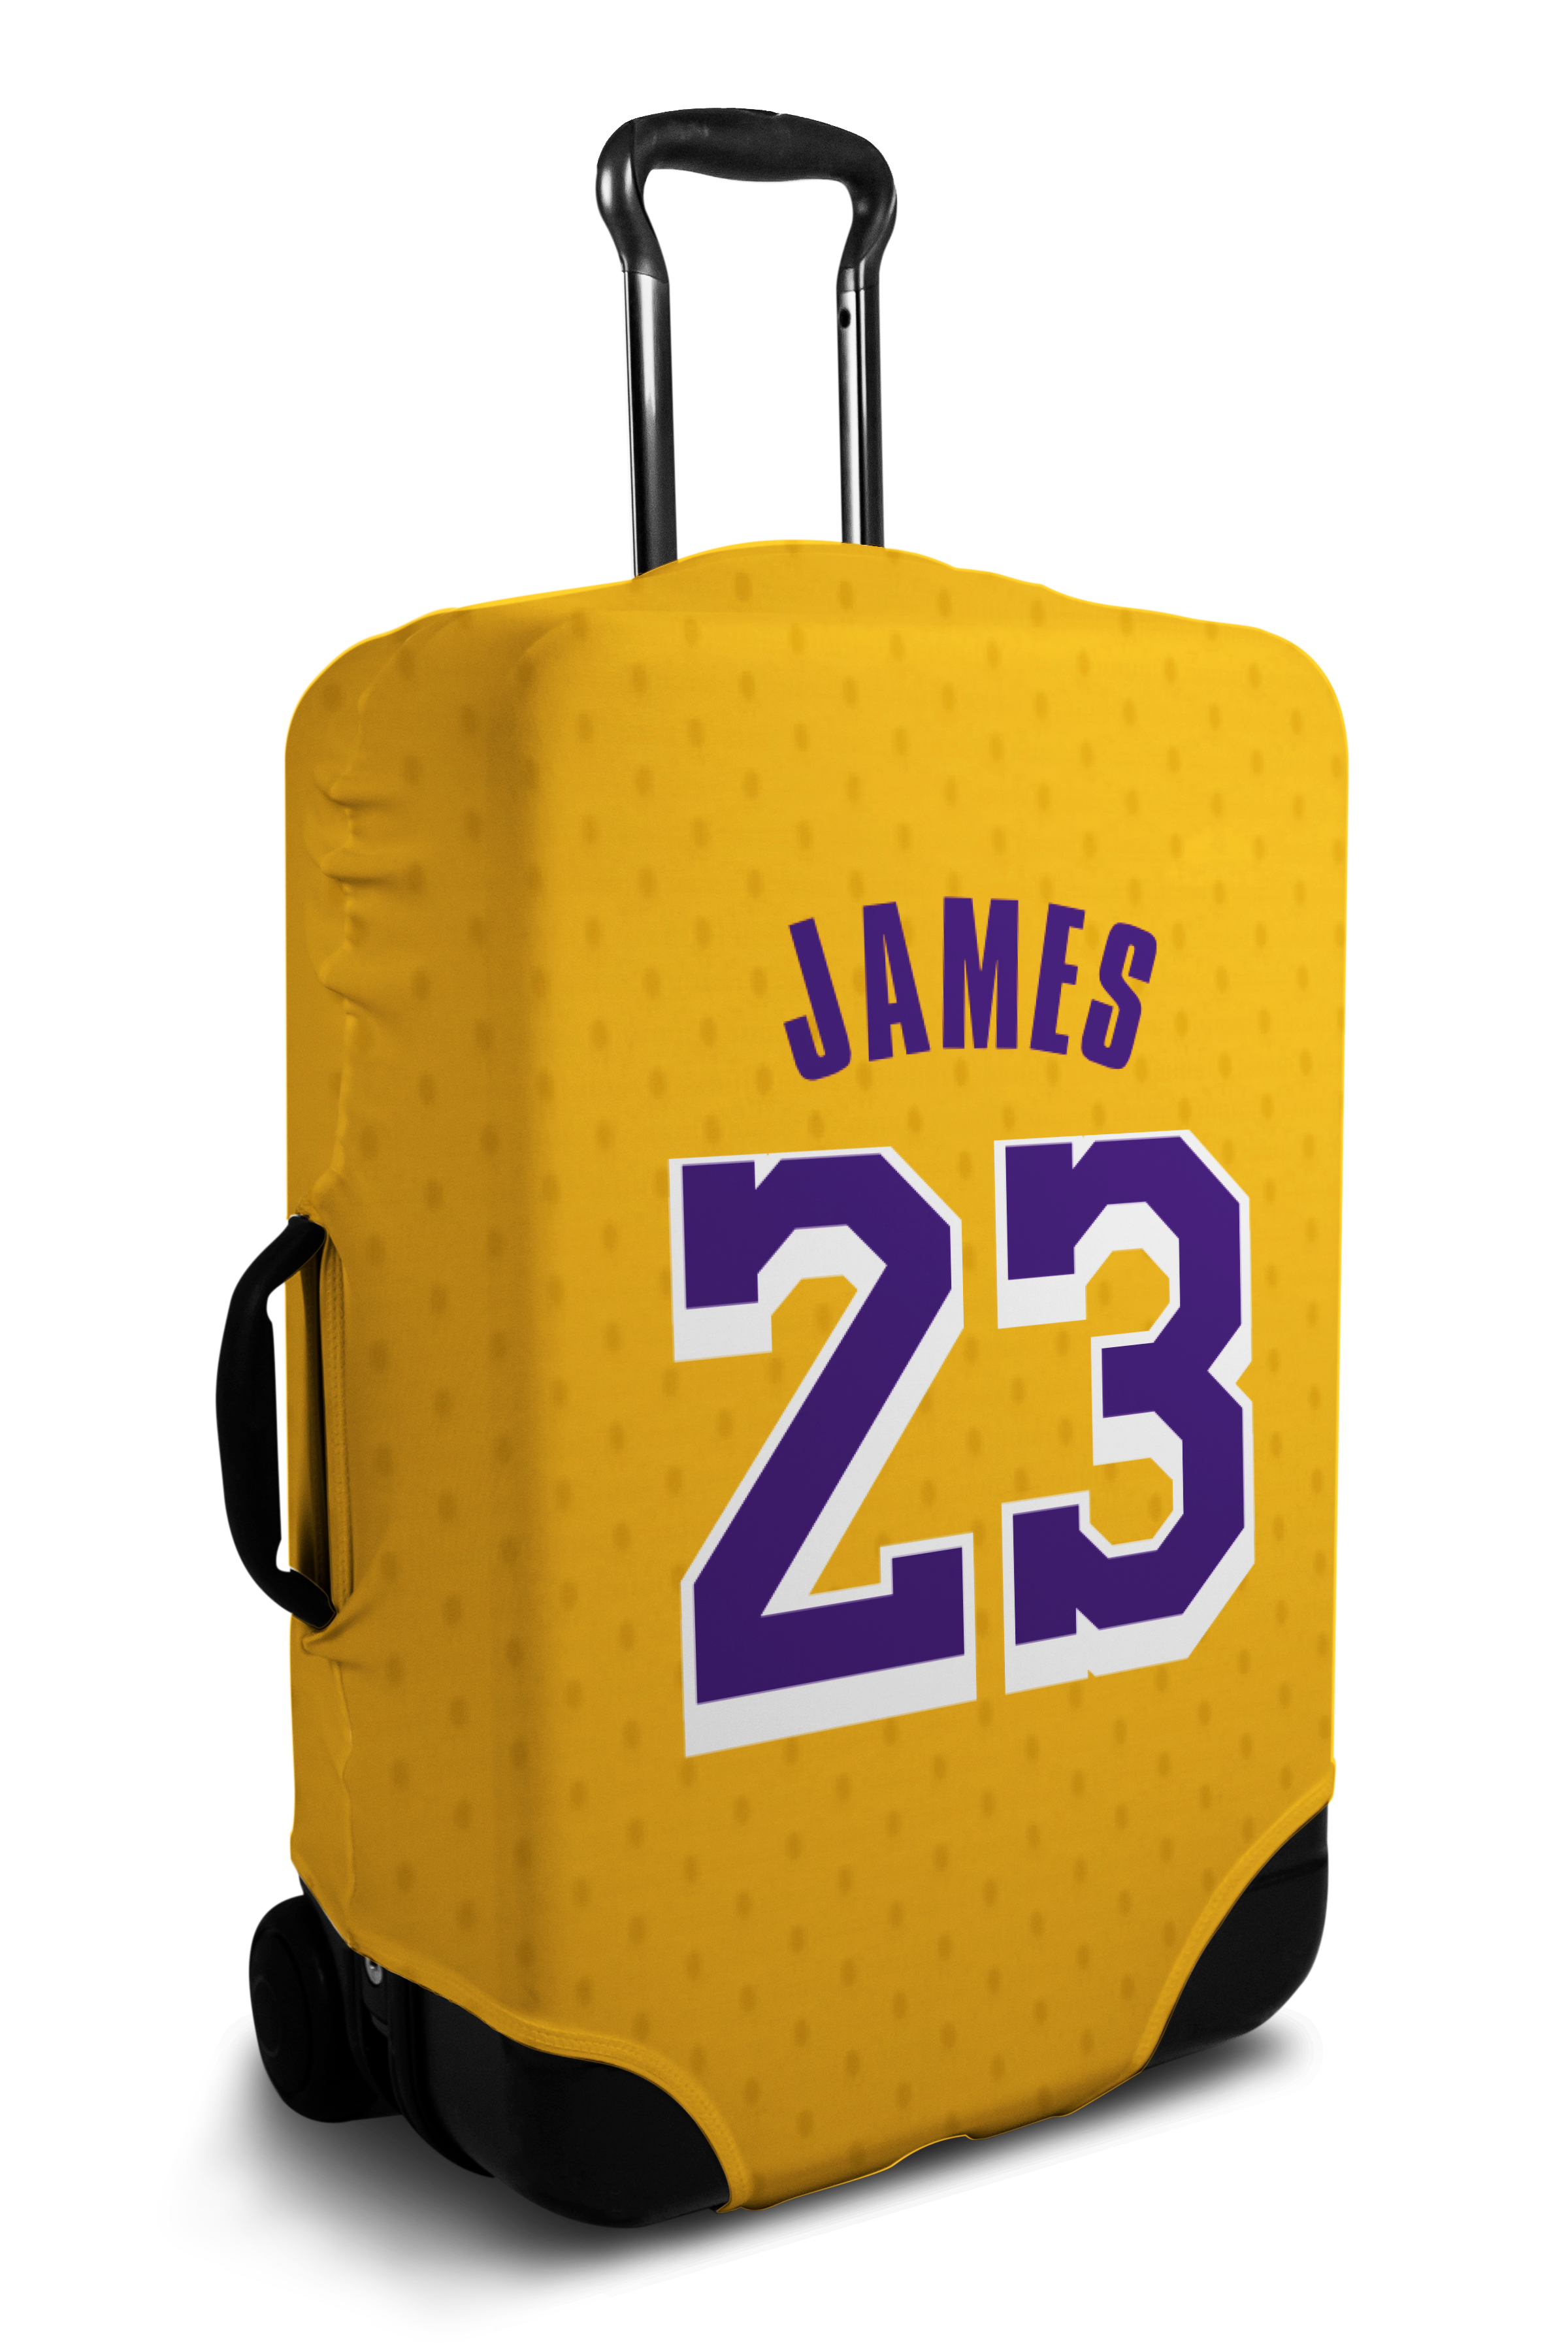 pictures of lebron james jersey